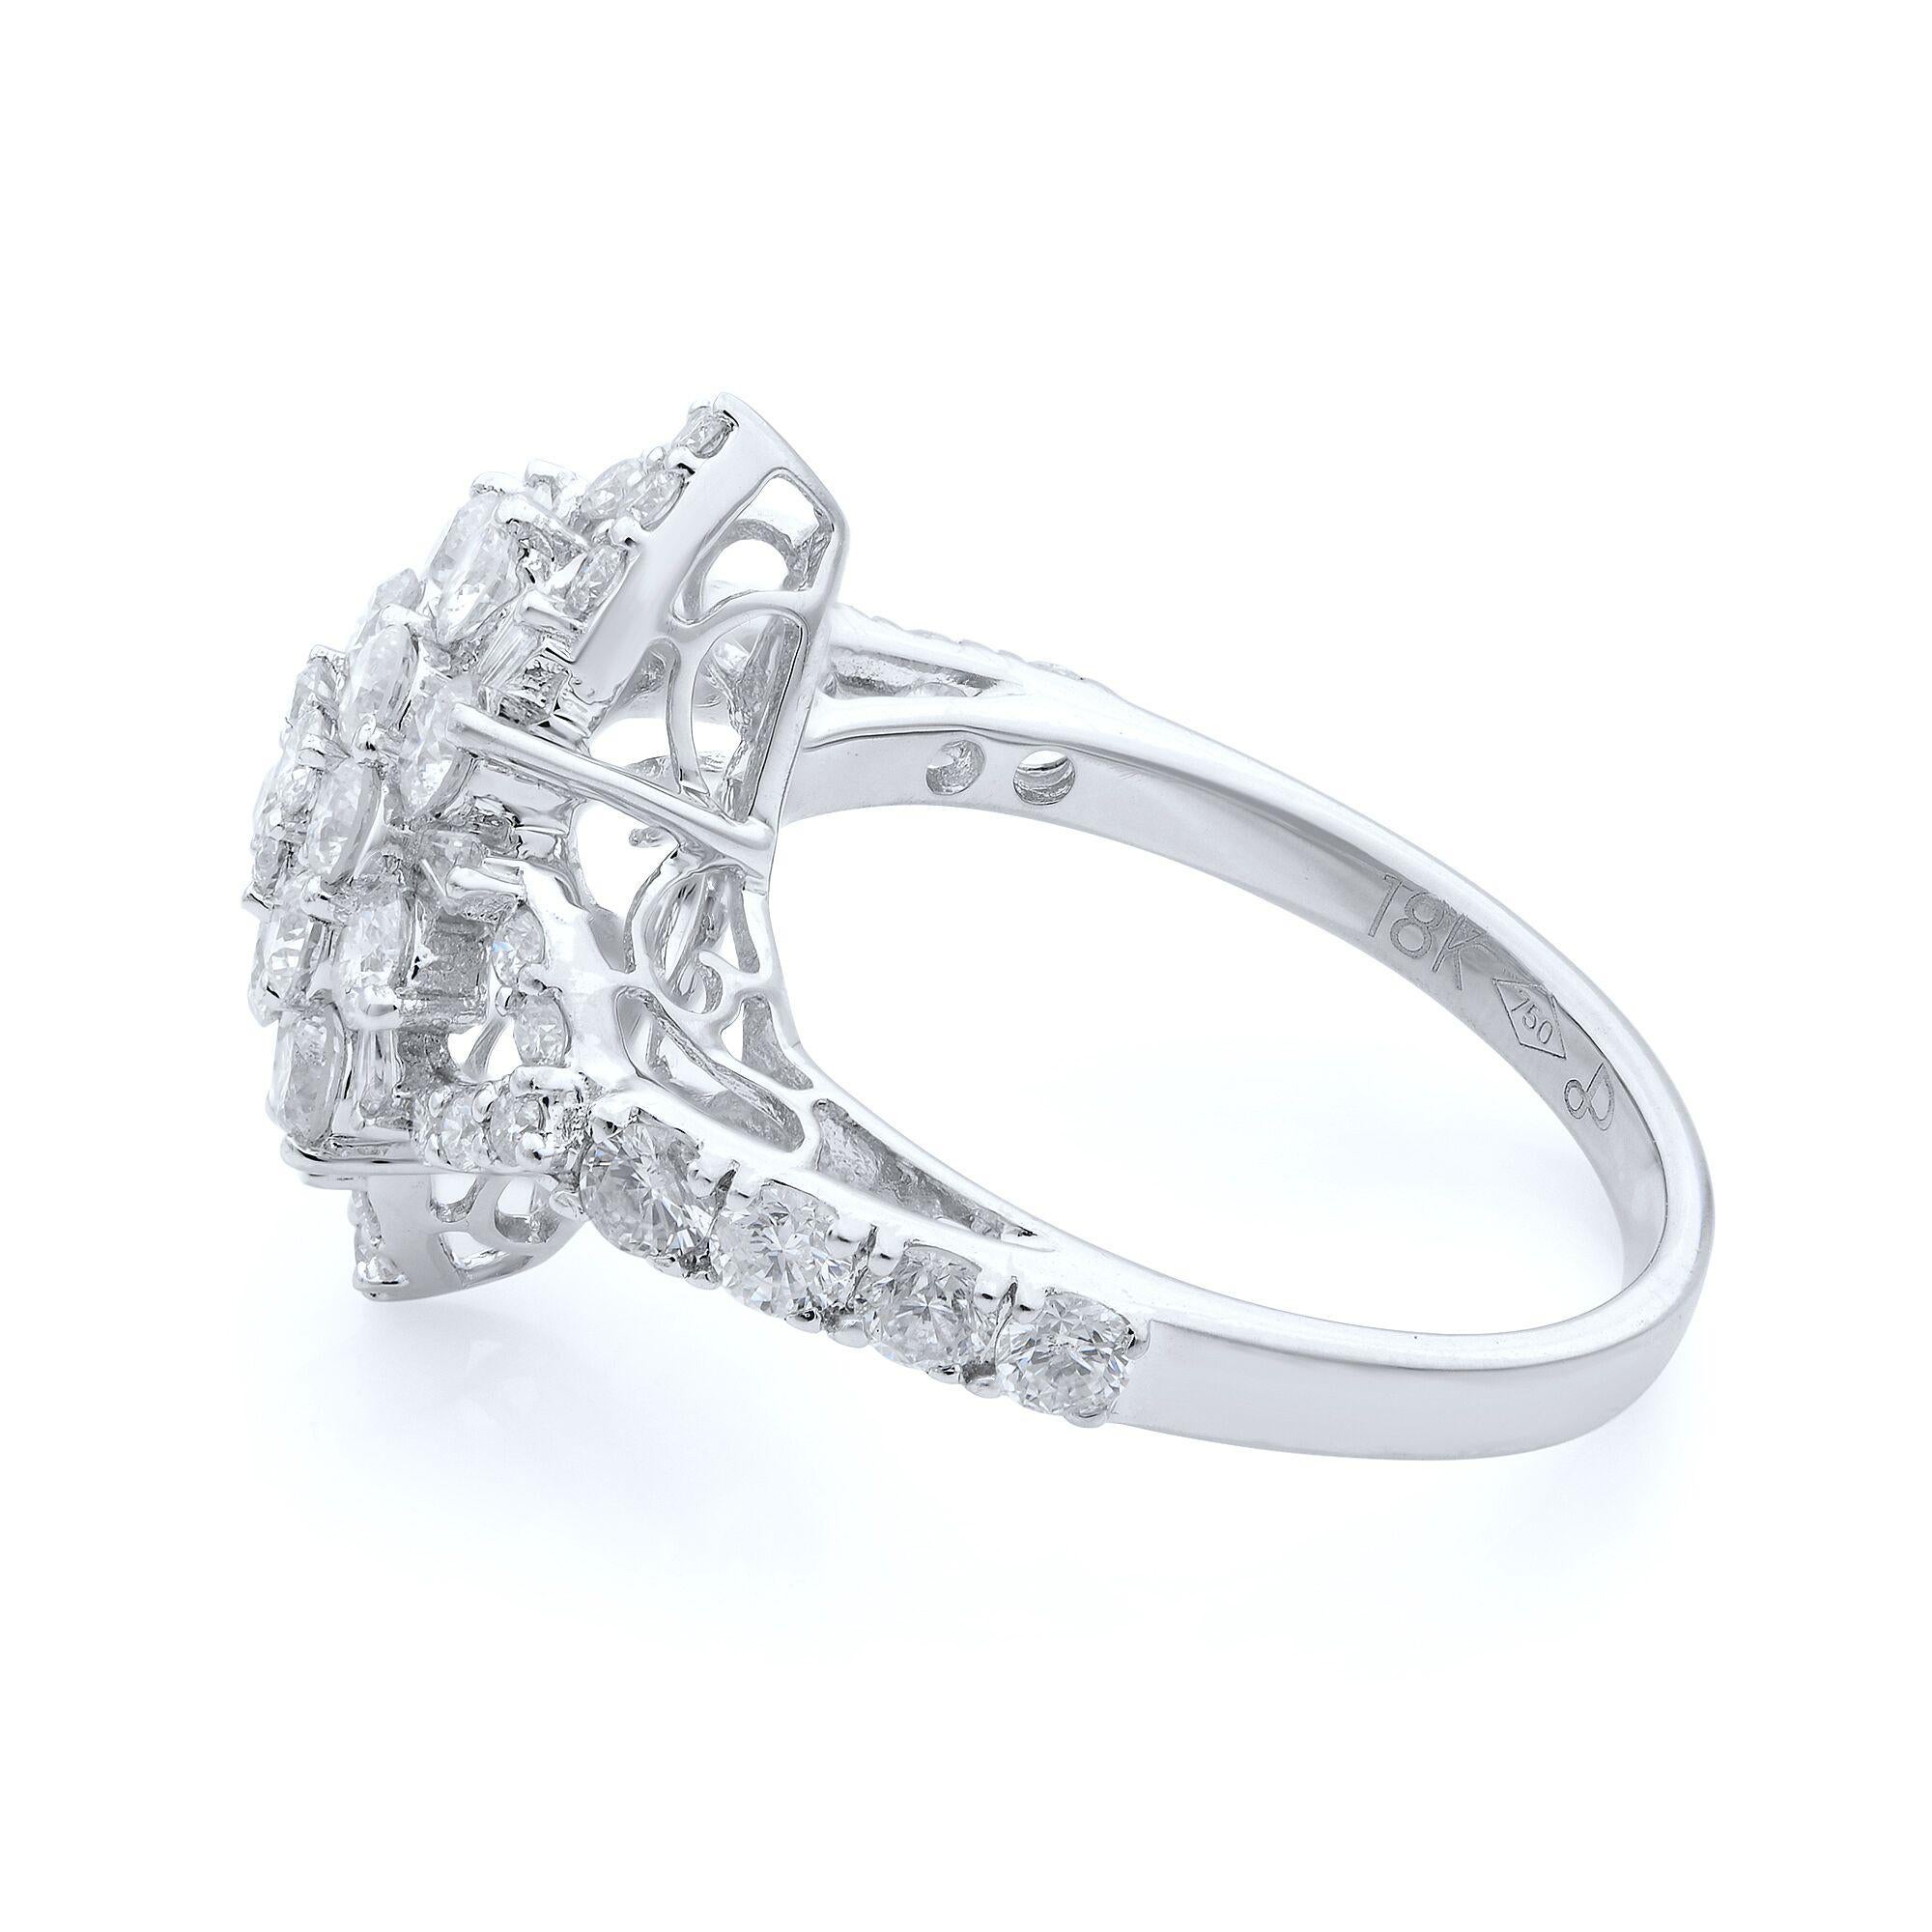 2.00 carat baguette & round cut diamonds 18k white gold flower cocktail ring. Diamonds are VVS1 clarity and color G. Ring size 7.